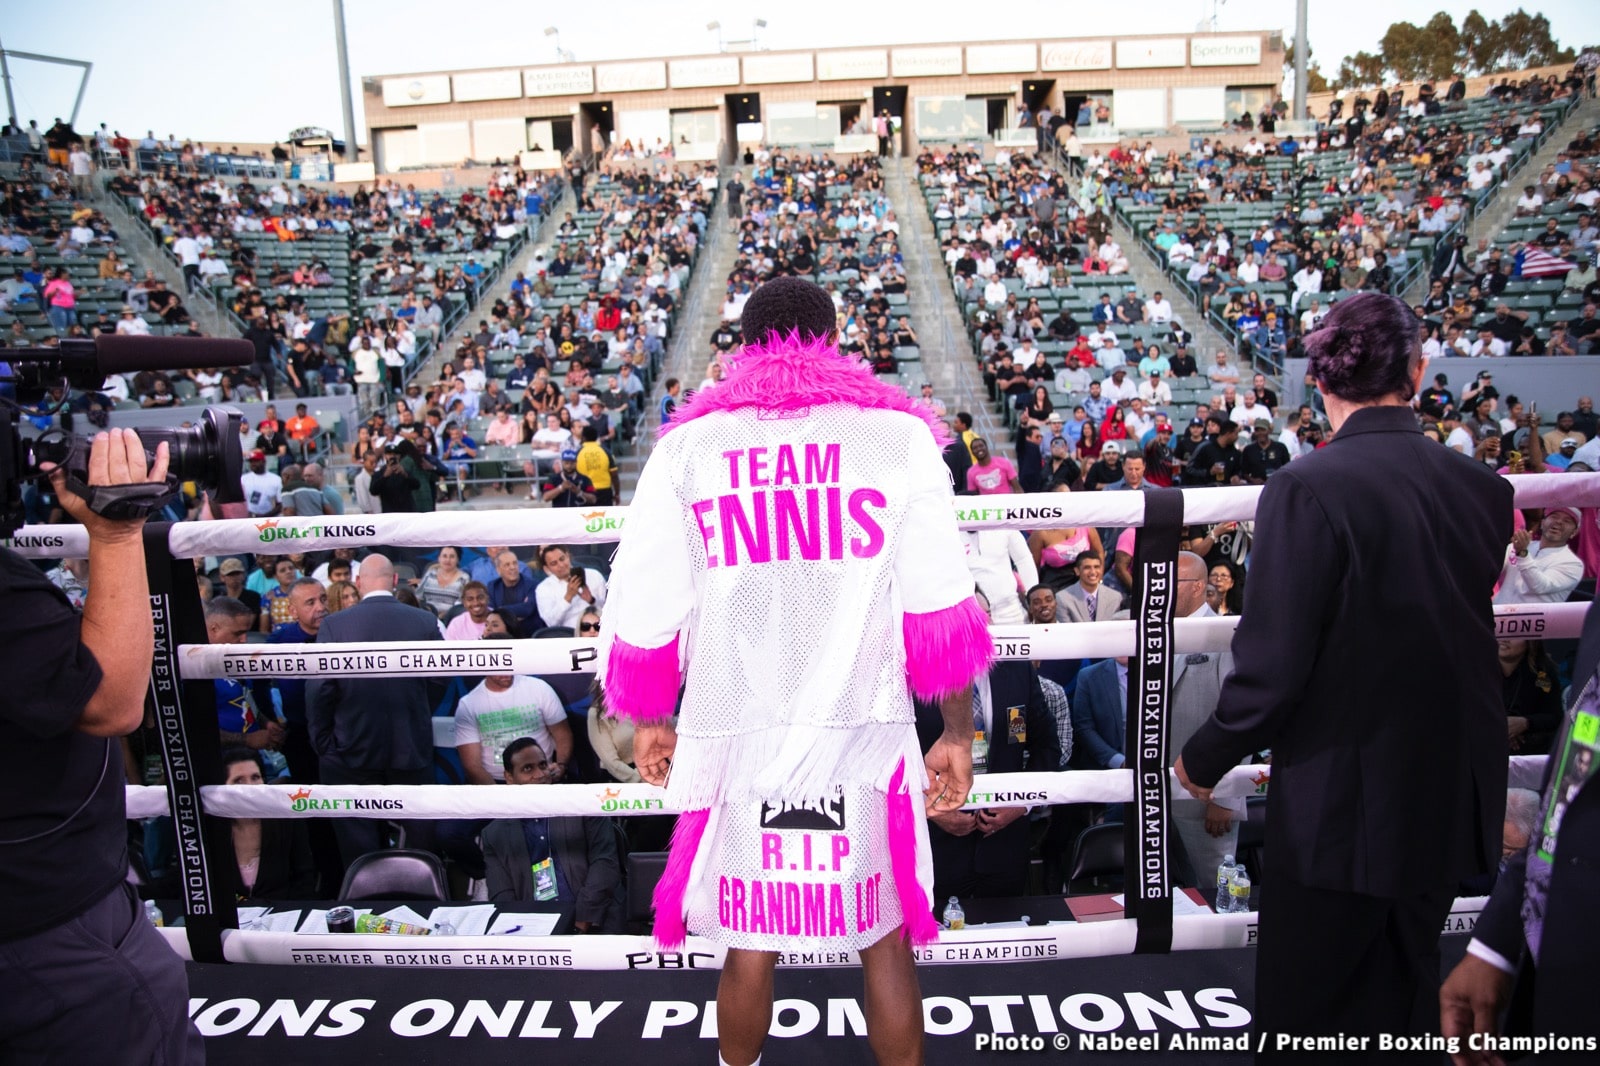 Image: Boxing Results: Jermell “Iron Man” Charlo & Jaron “Boots” Ennis Win By KO!